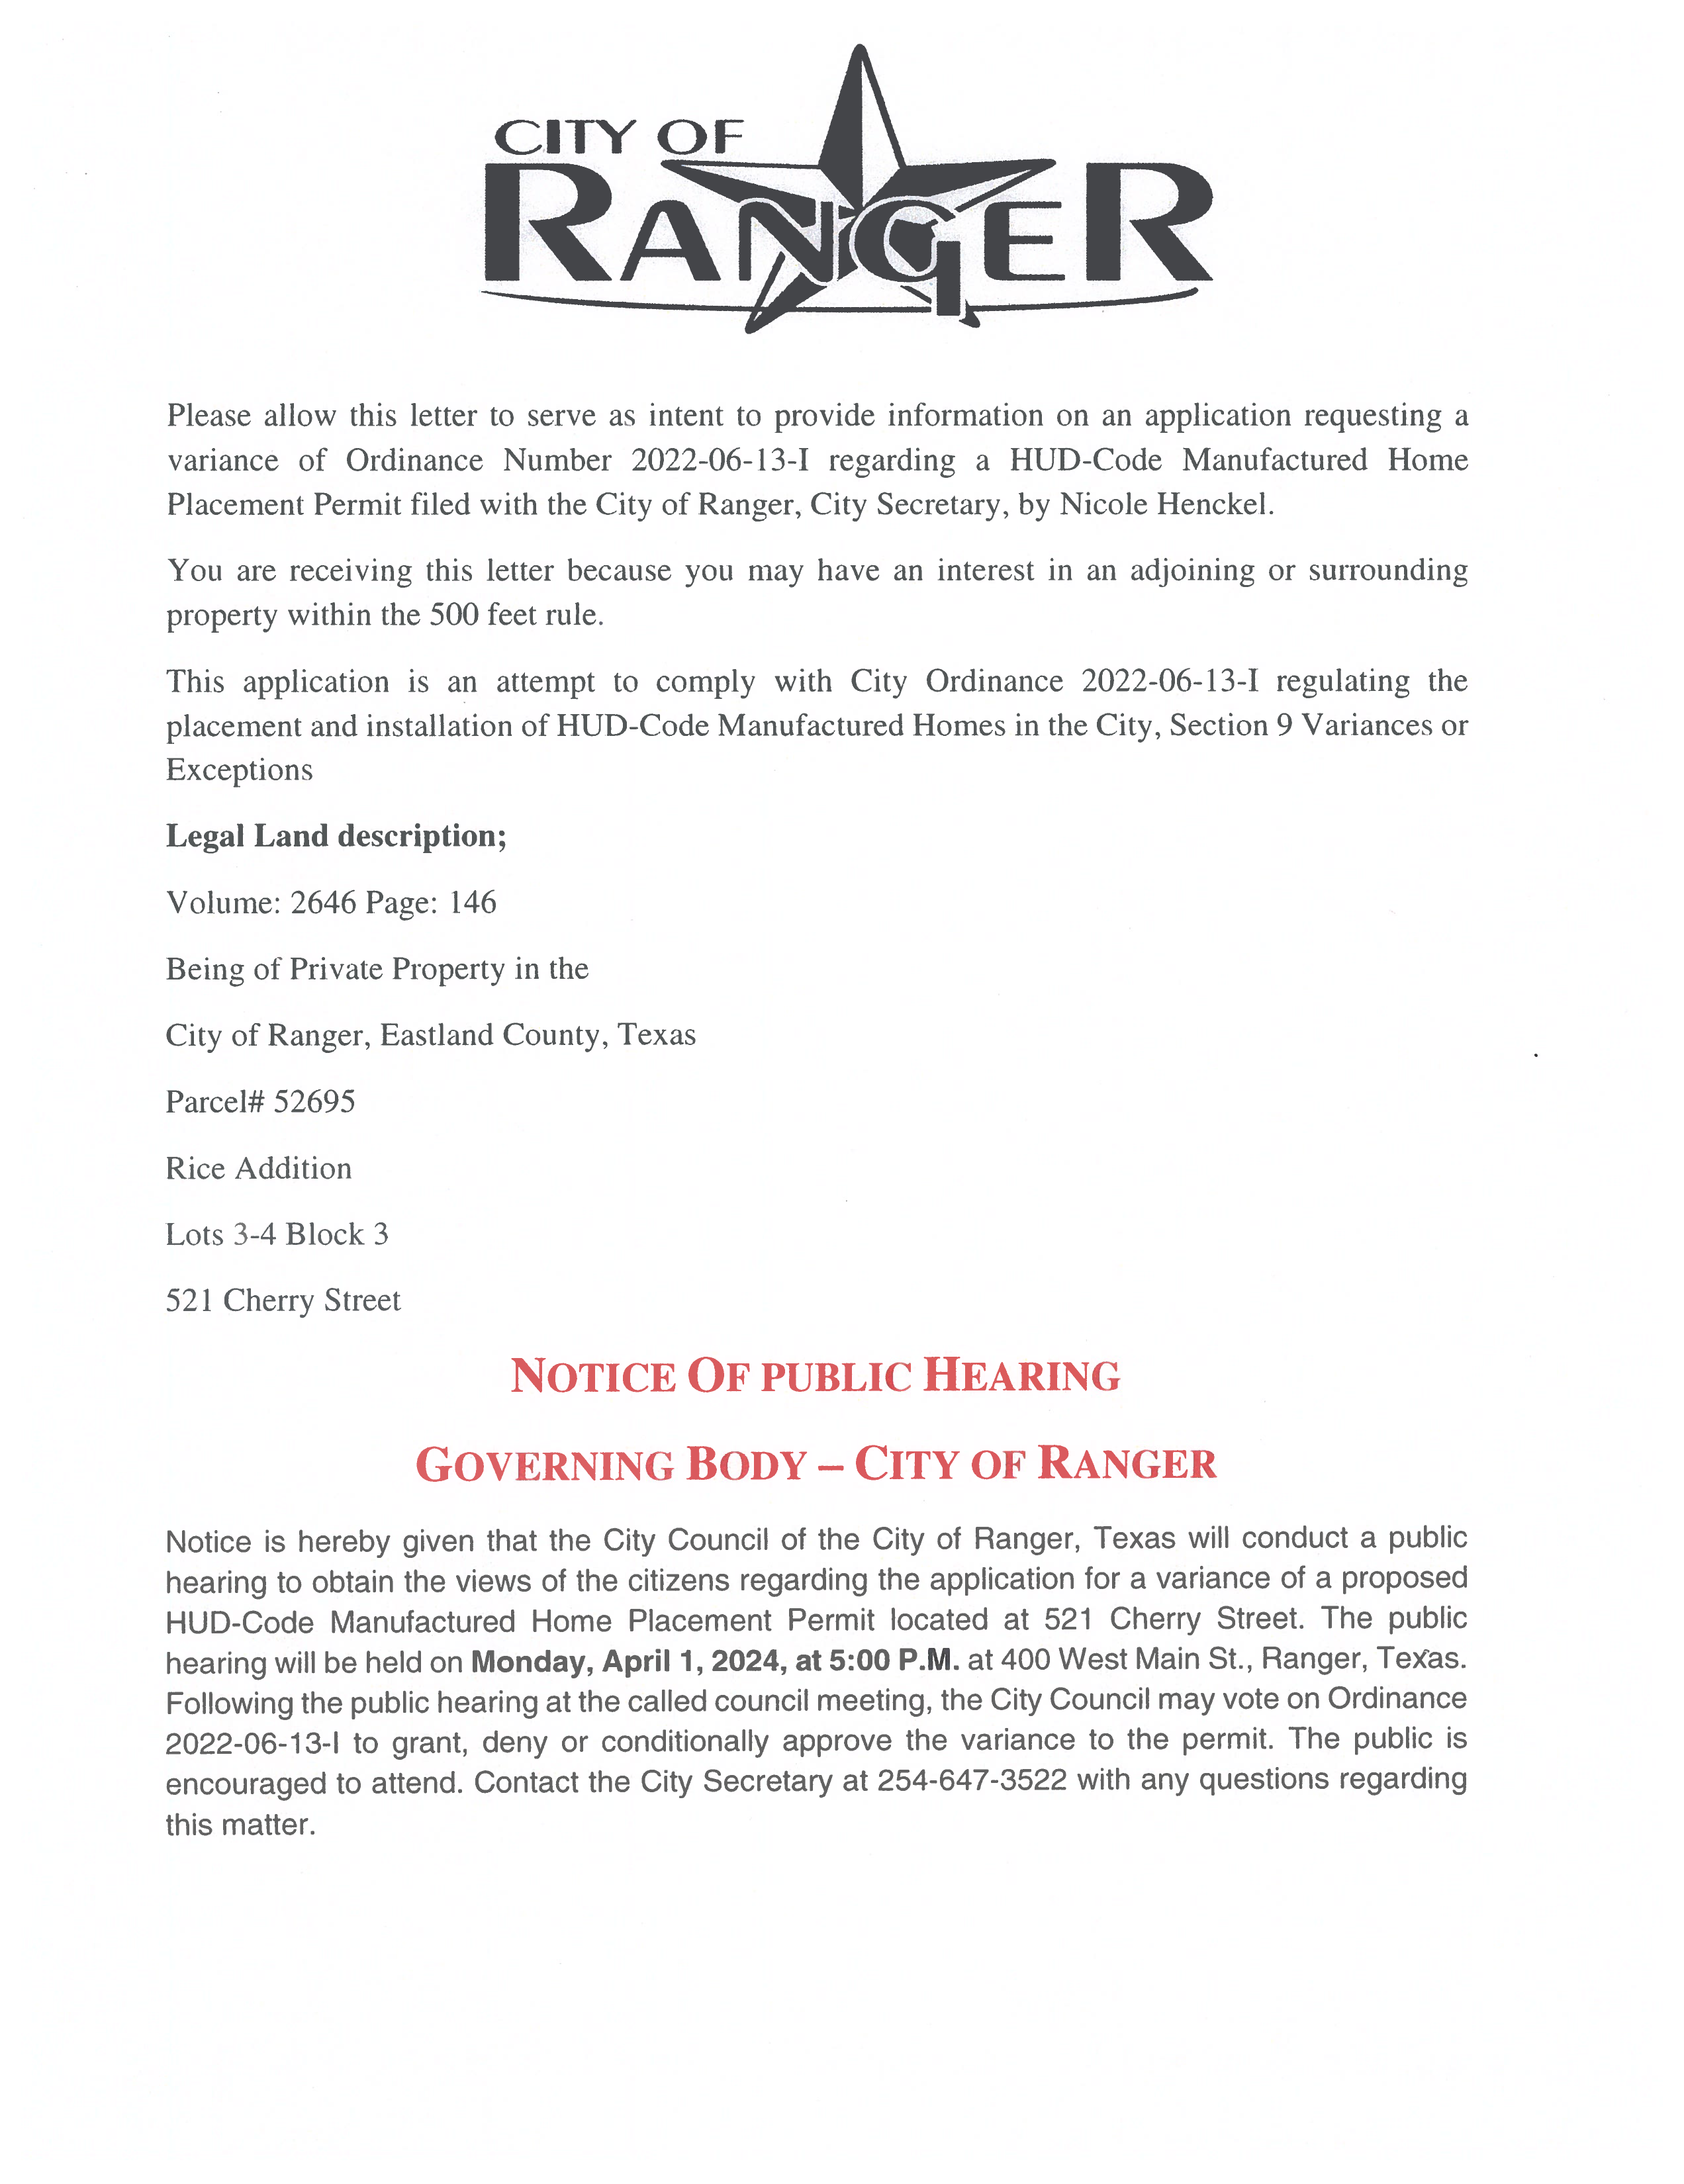 Notice is hereby given that the City Council of the City of Ranger, Texas will conduct a public hearing on Monday, April 1, 2024 at 5 PM...